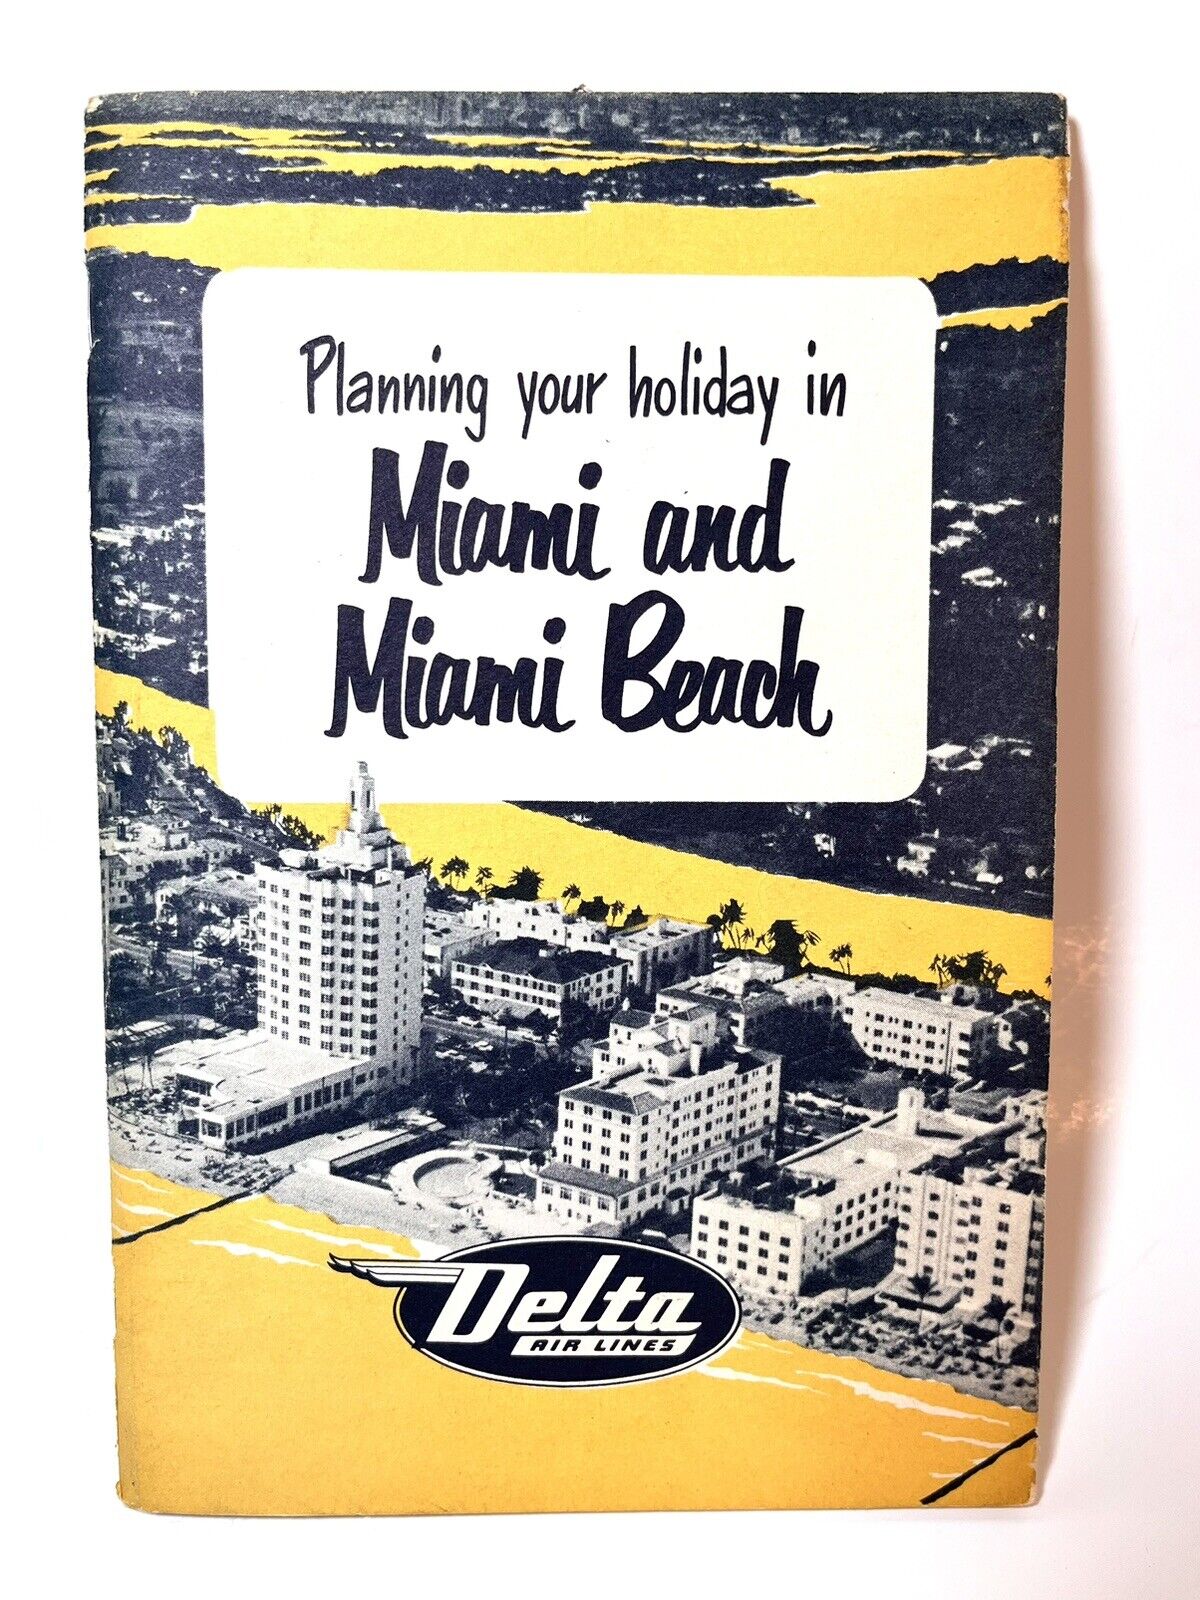 1953 MIAMI BEACH FL Delta Air Lines Vacation Planner ~ 64 Page Booklet Guide